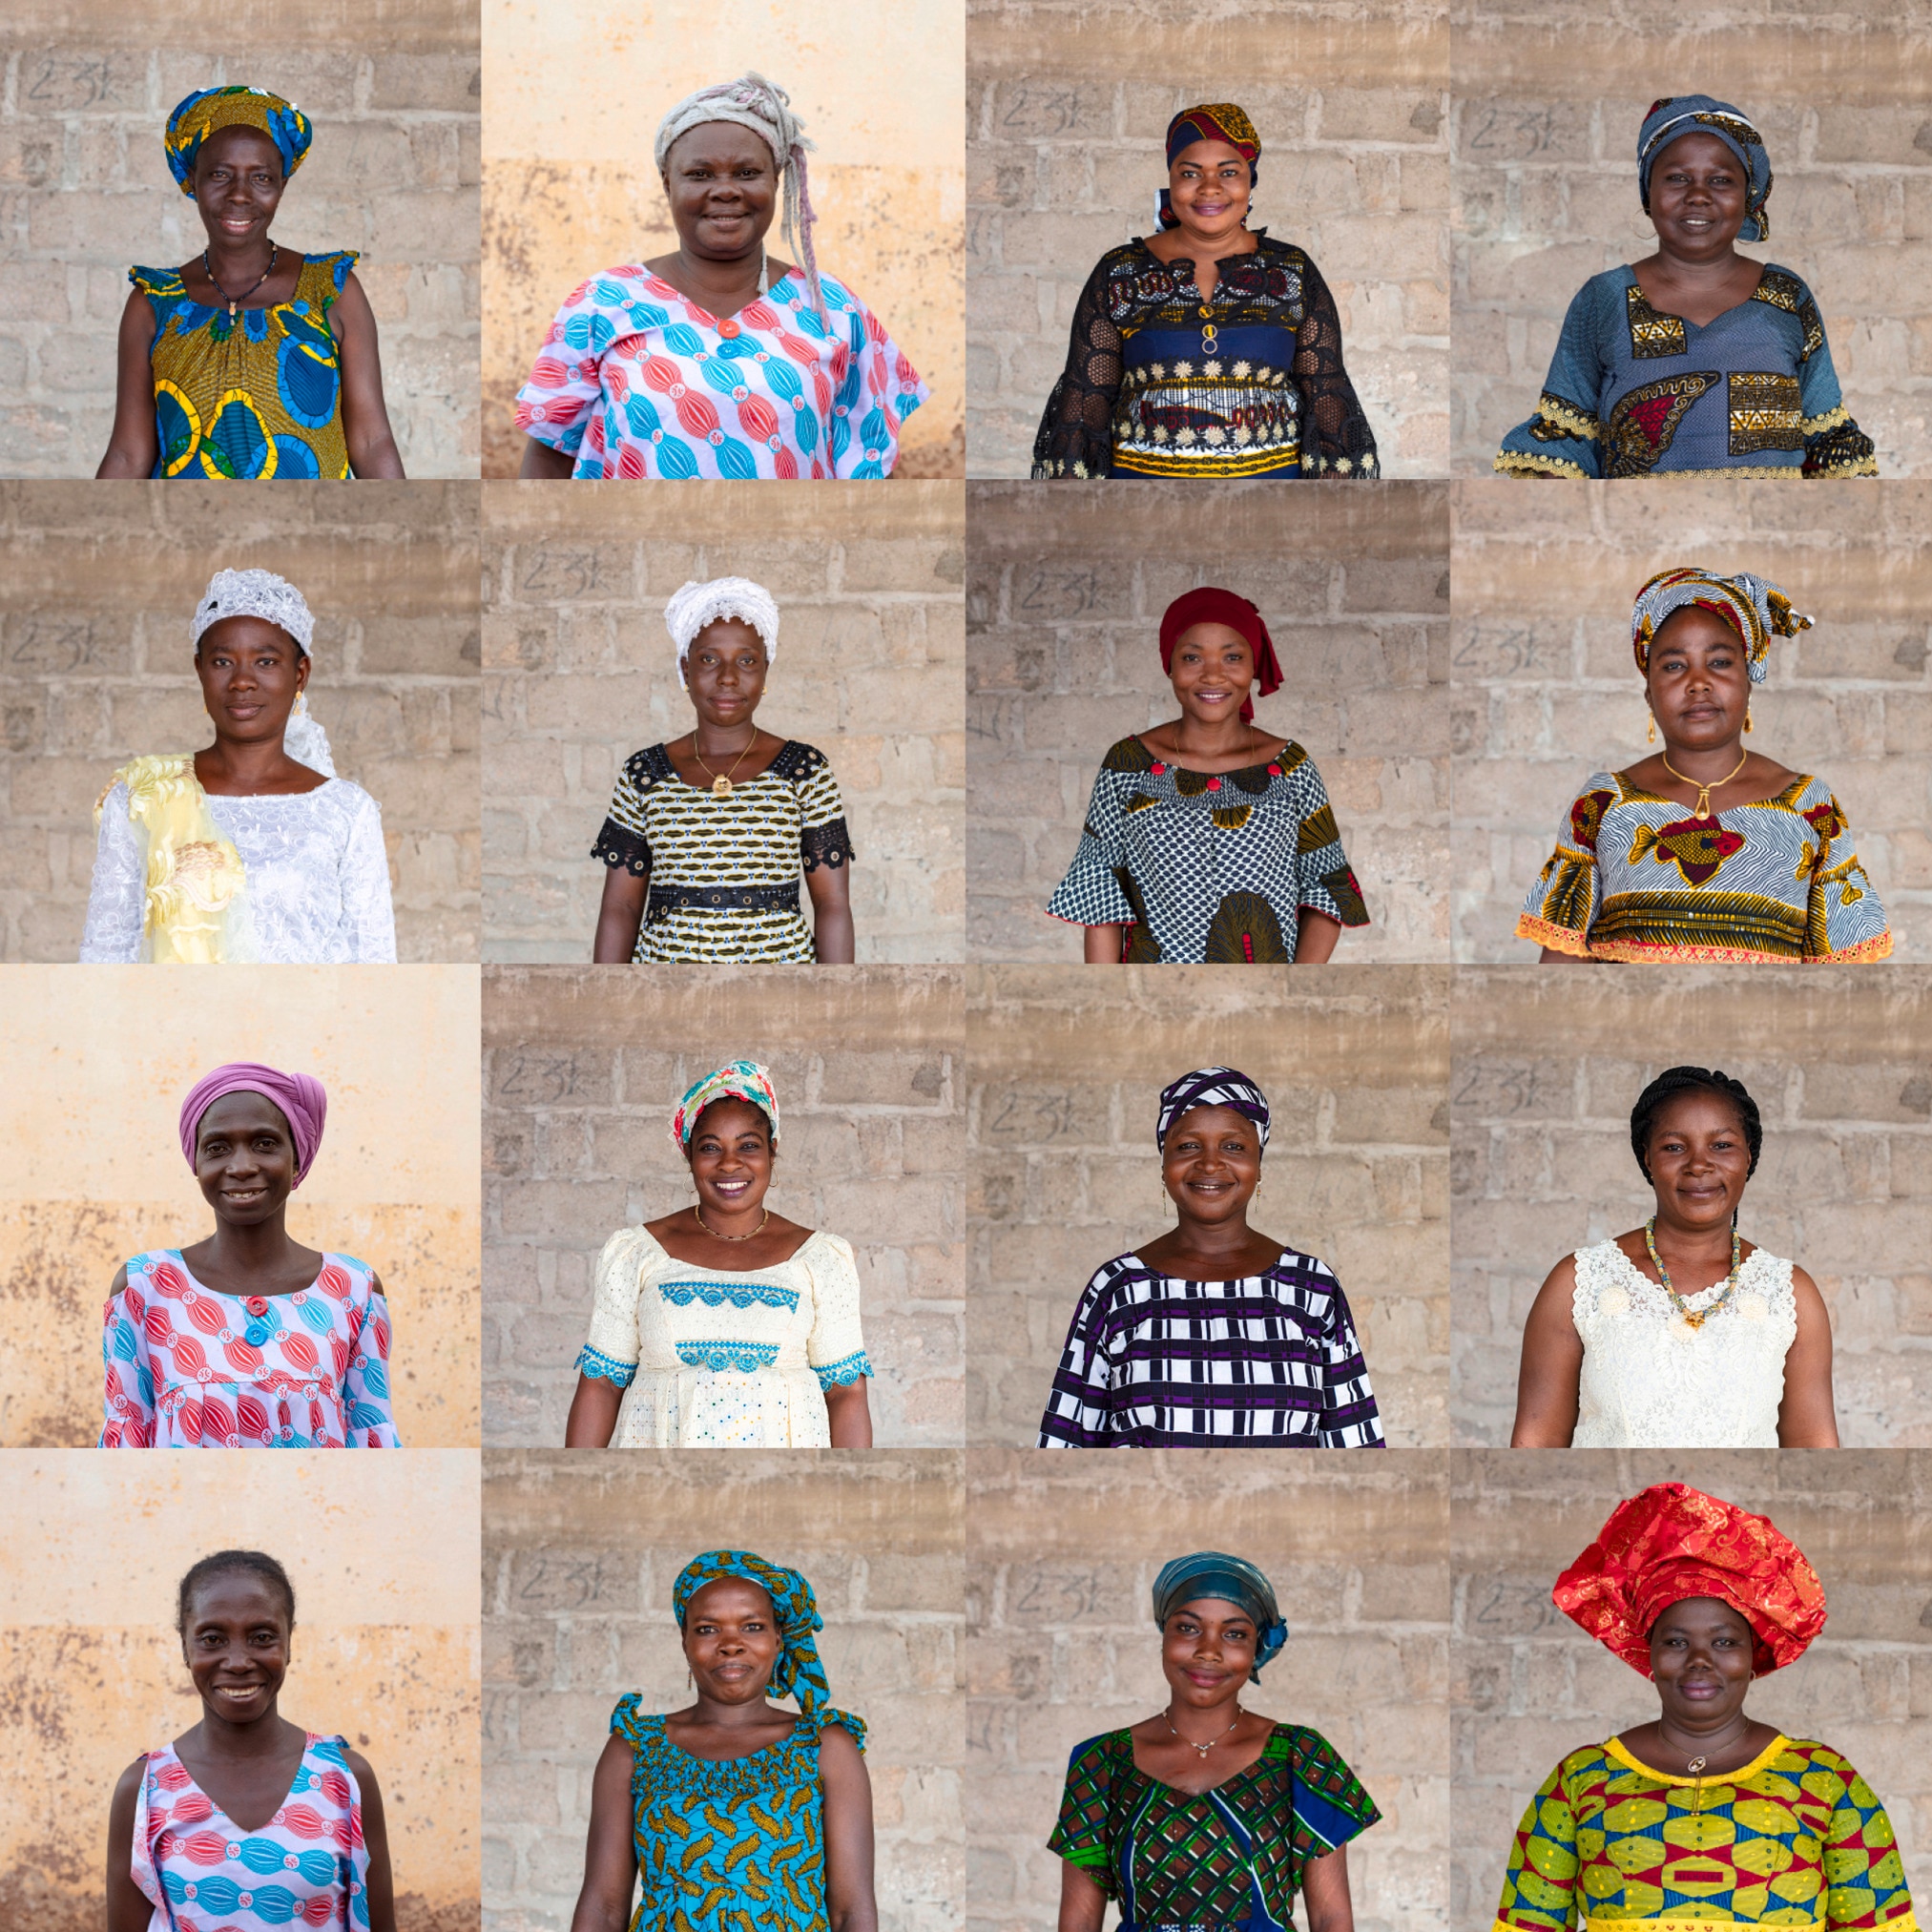 grid of 16 smiling african women portraits #2 - interspersed with a few colourful graphic square cut out illustrations